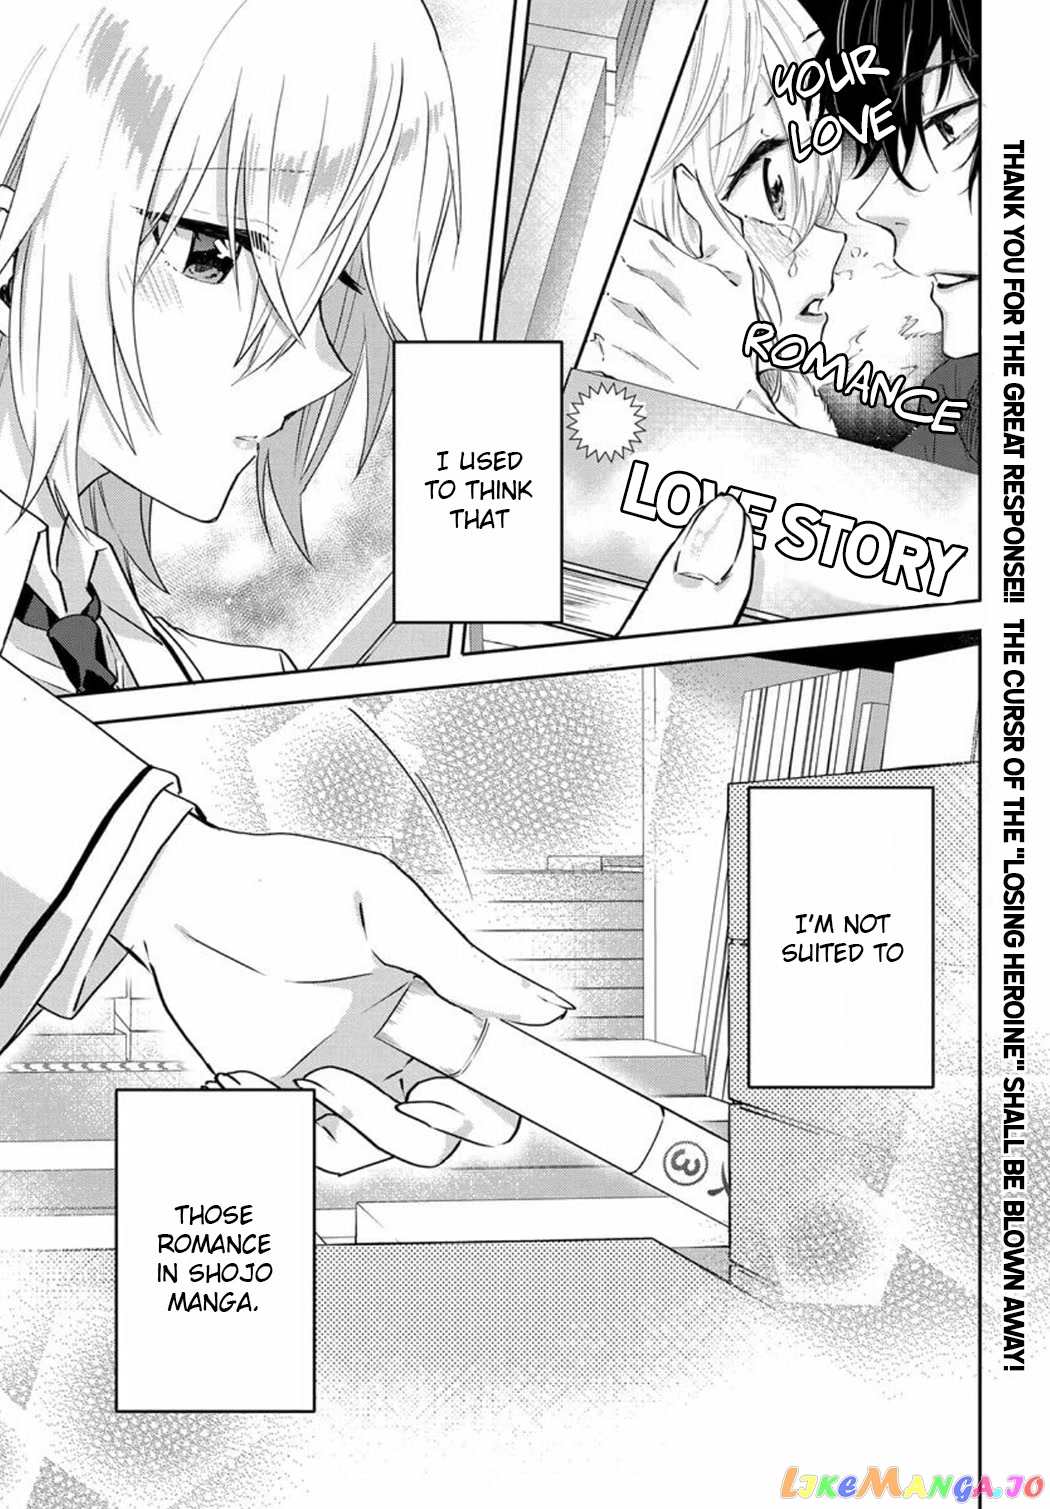 Since I’ve Entered the World of Romantic Comedy Manga, I’ll Do My Best to Make the Losing Heroine Happy. chapter 2 - page 1